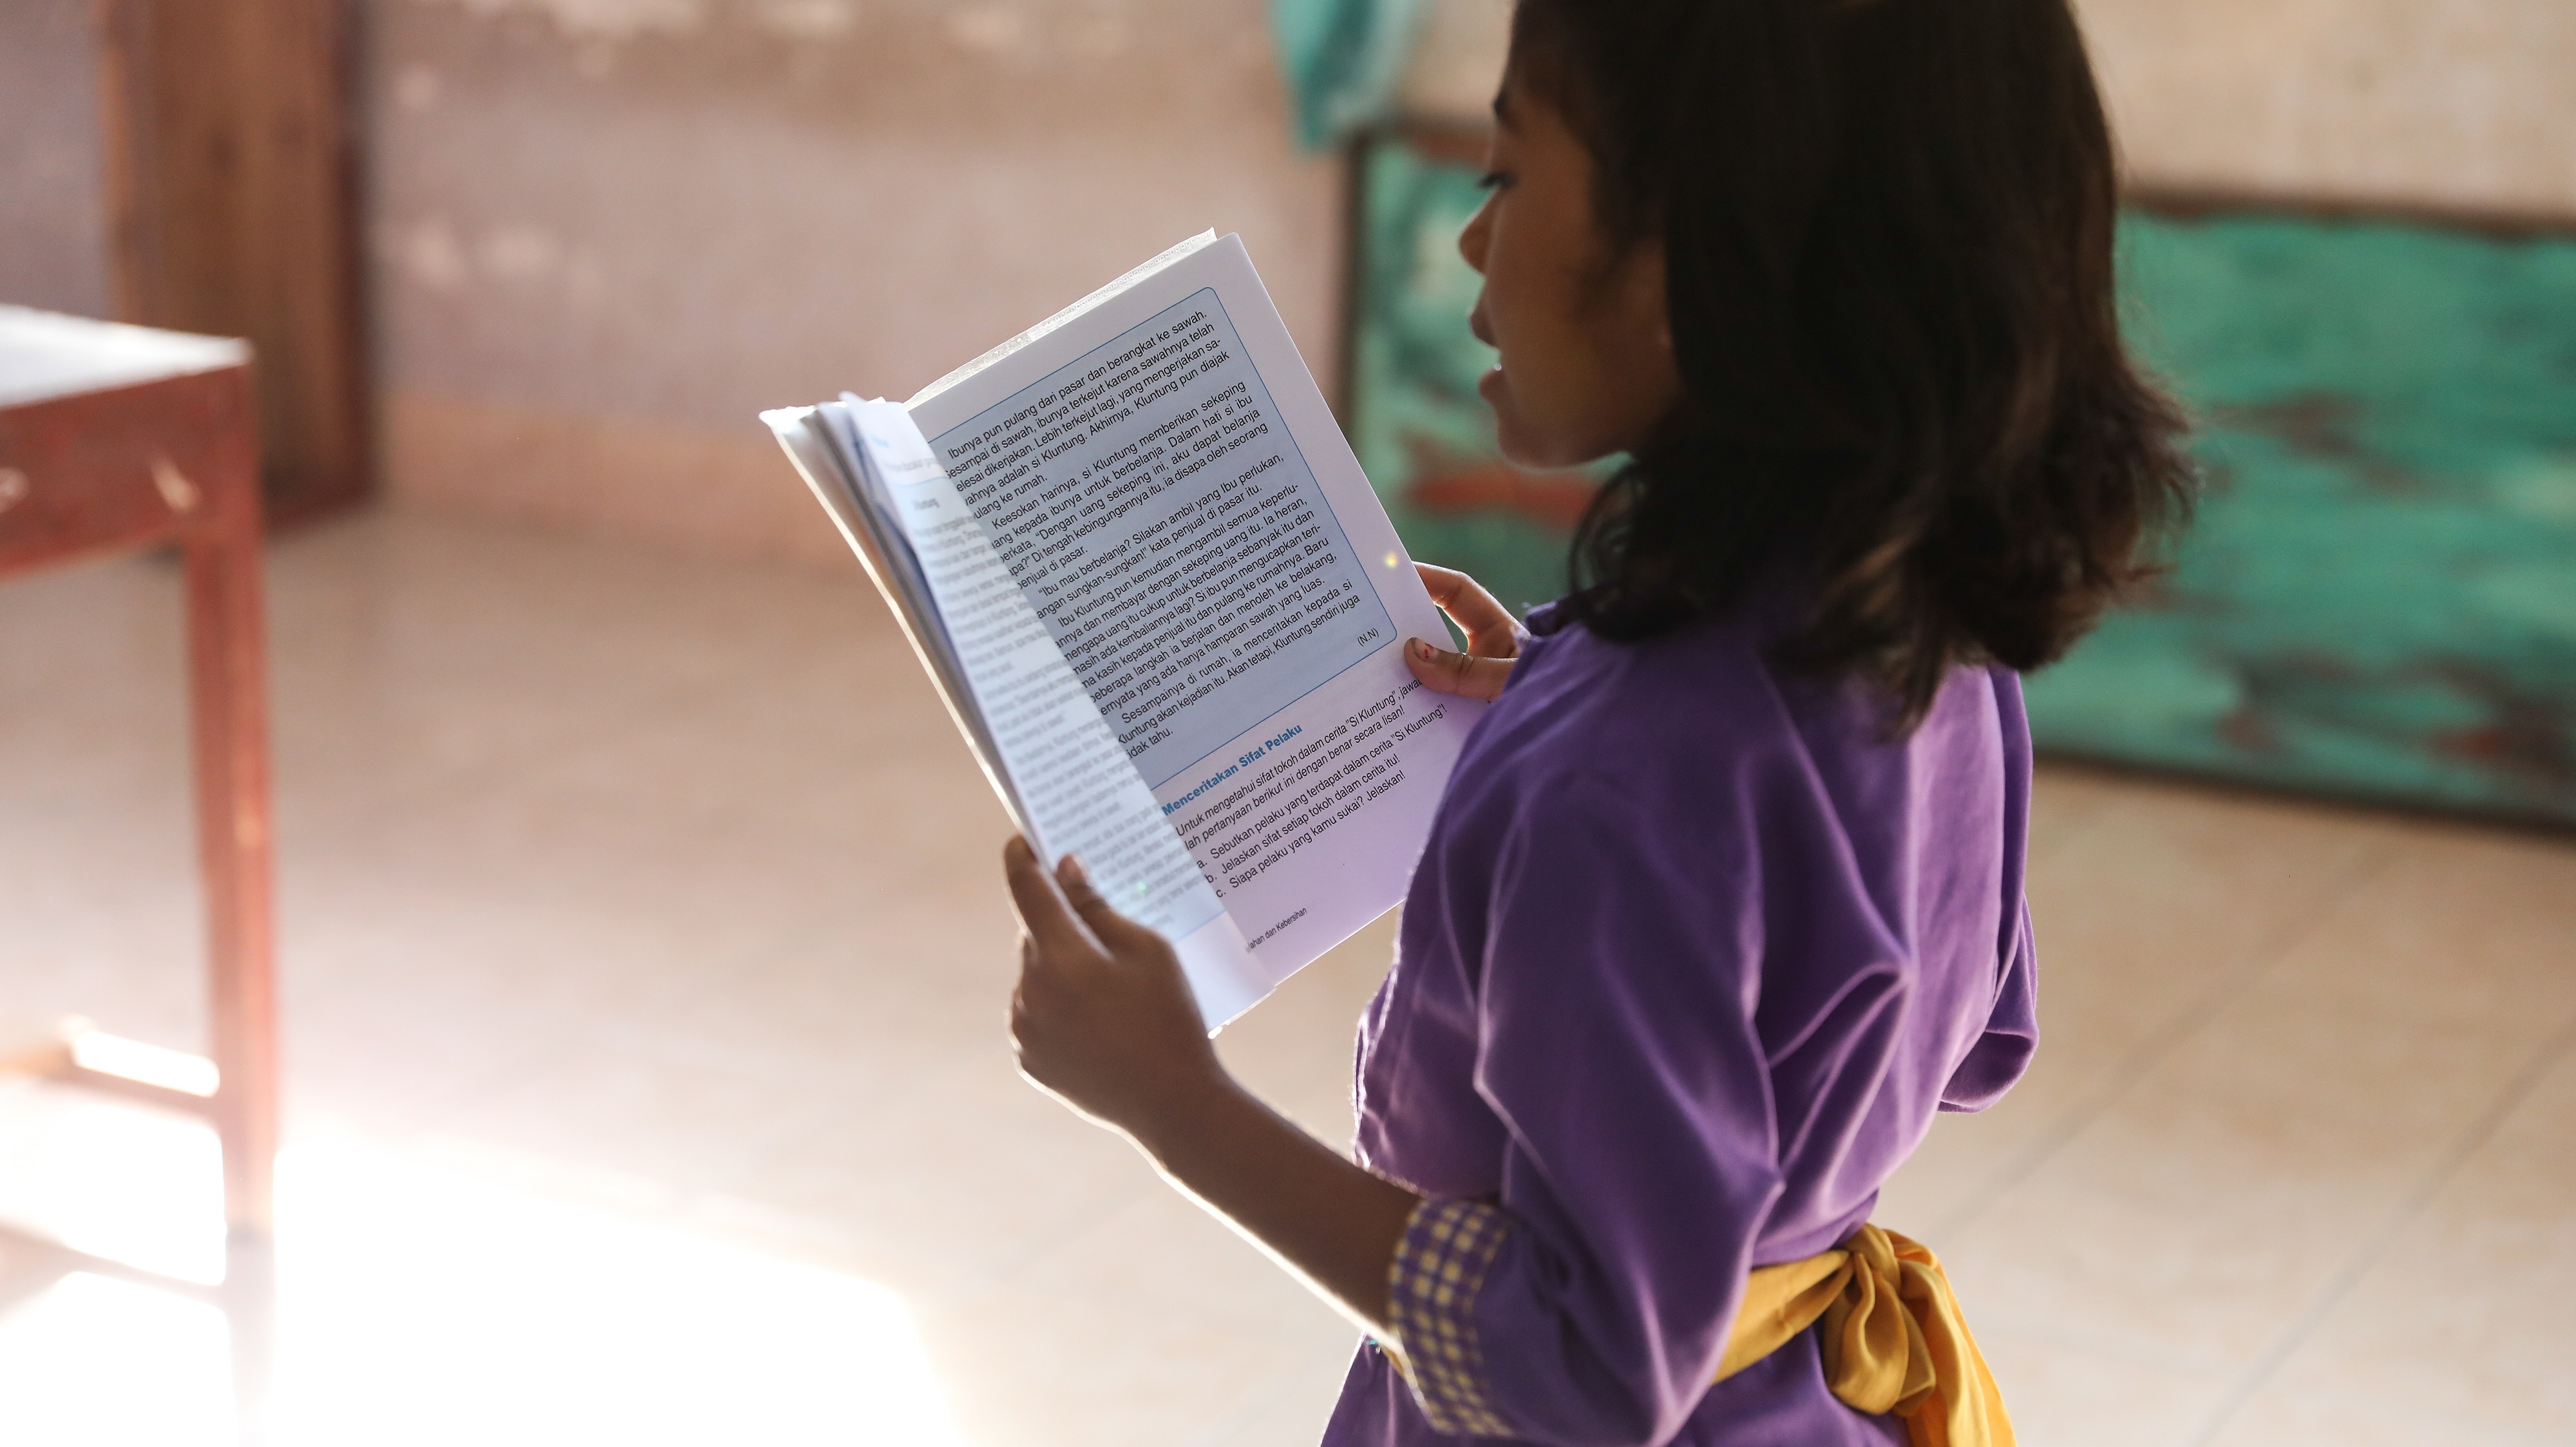 Primary school students in Bima face many learning challenges, including low literacy levels, remoteness and issues of teacher training (Credit: INOVASI Program)